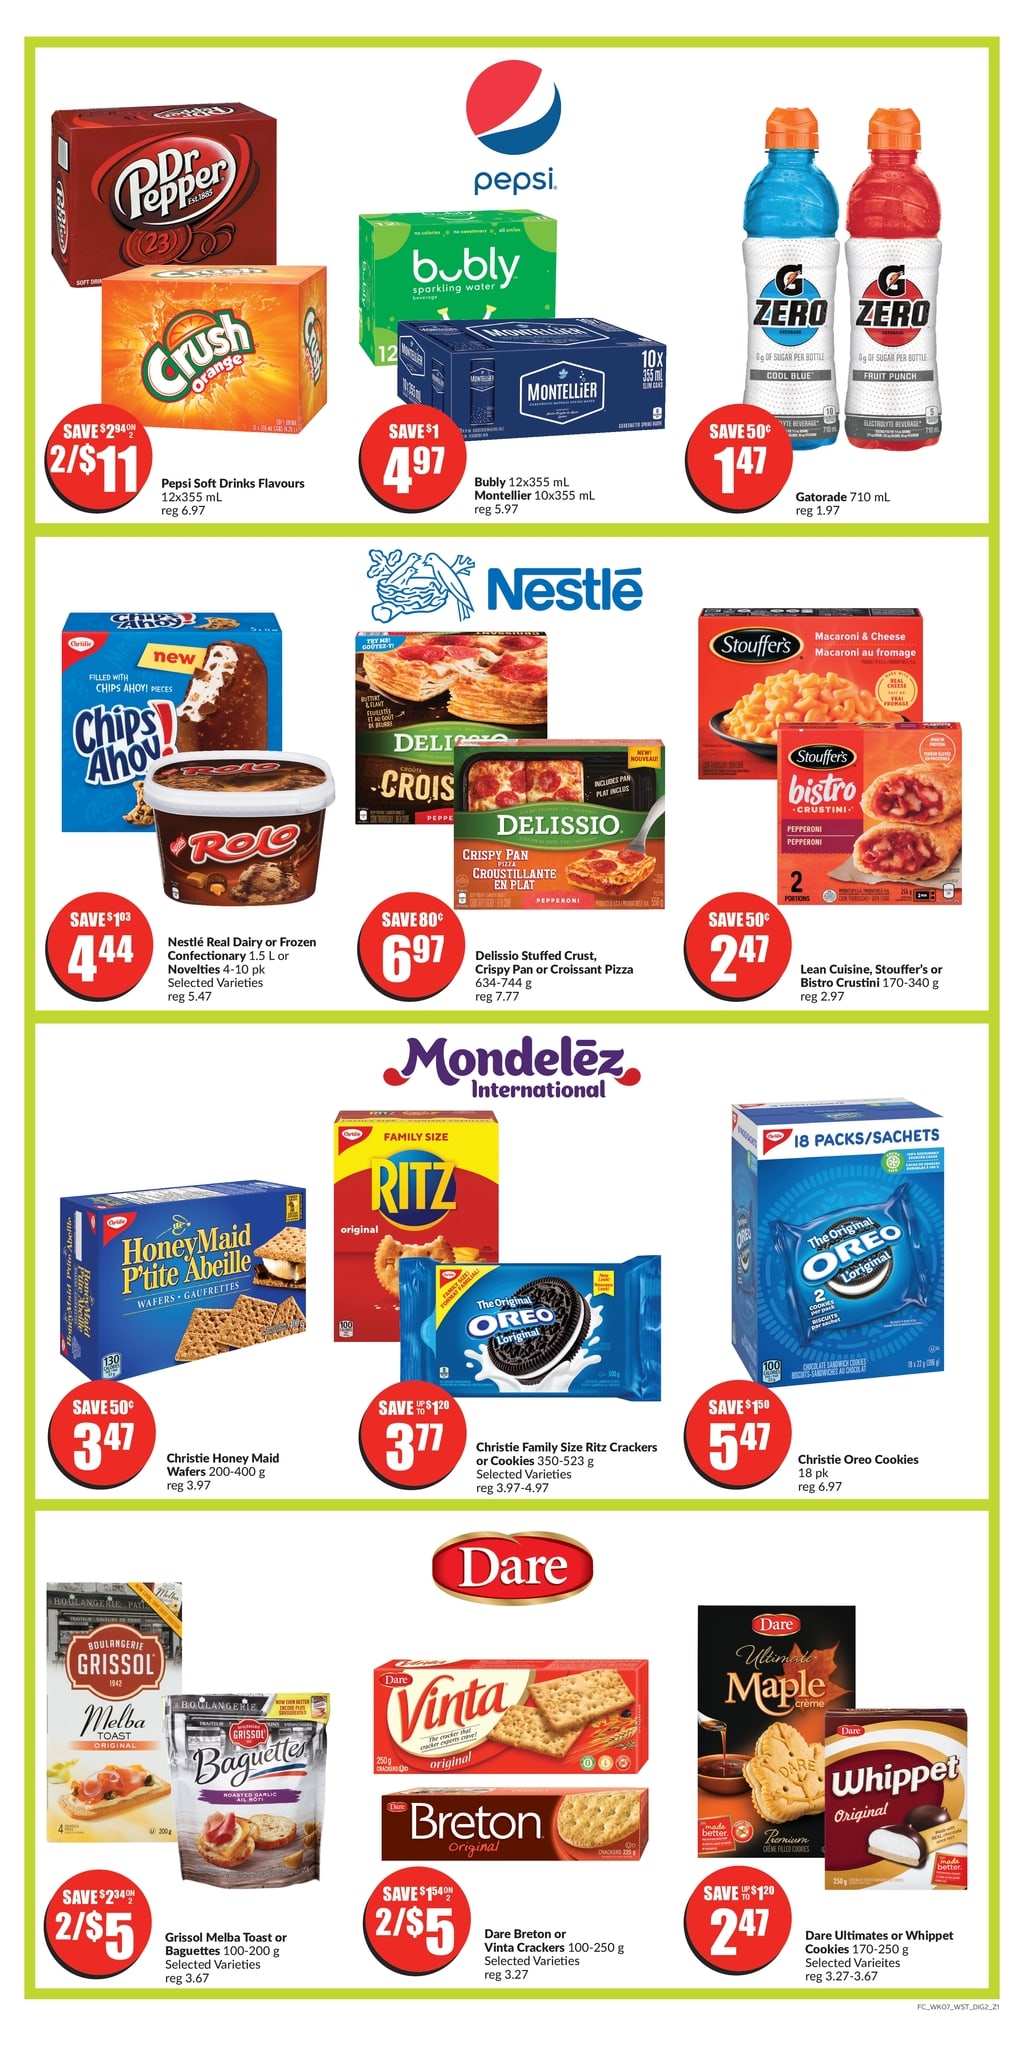 FreshCo British Columbia - Weekly Flyer Specials - Page 6